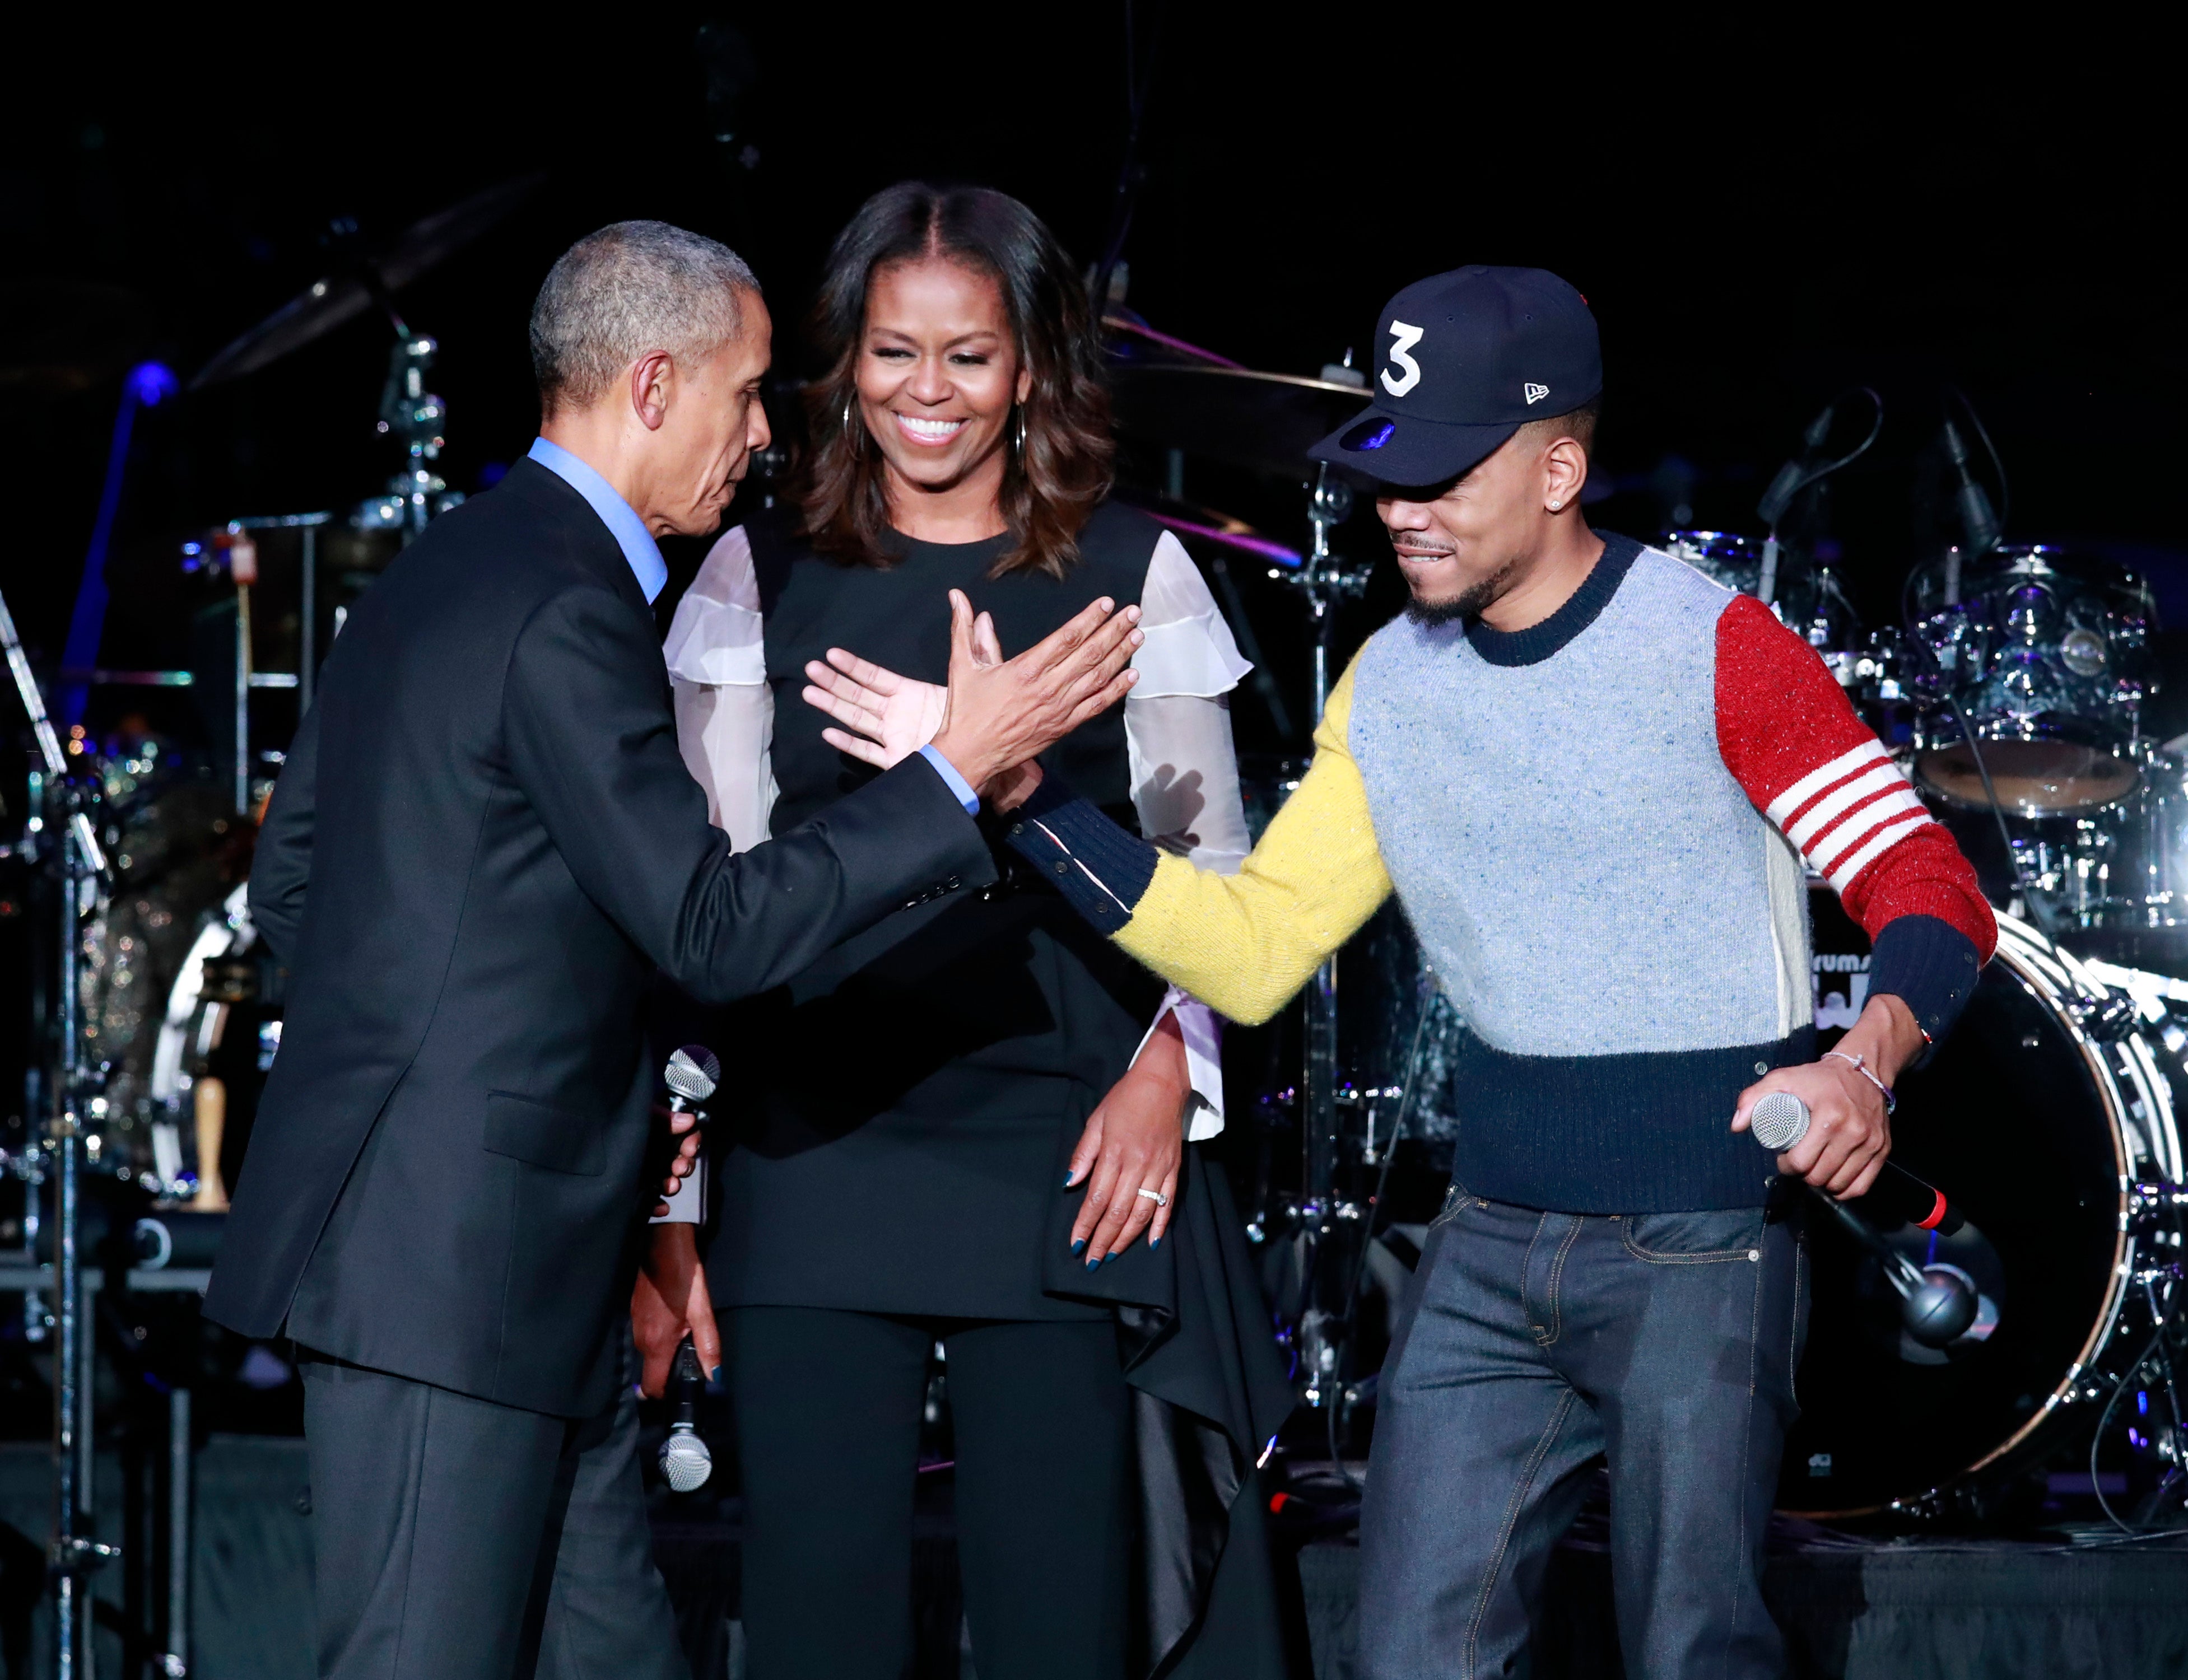 Chance The Rapper & Steph Curry Featured With Barack Obama In New PSA For 'My Brother's Keeper'
